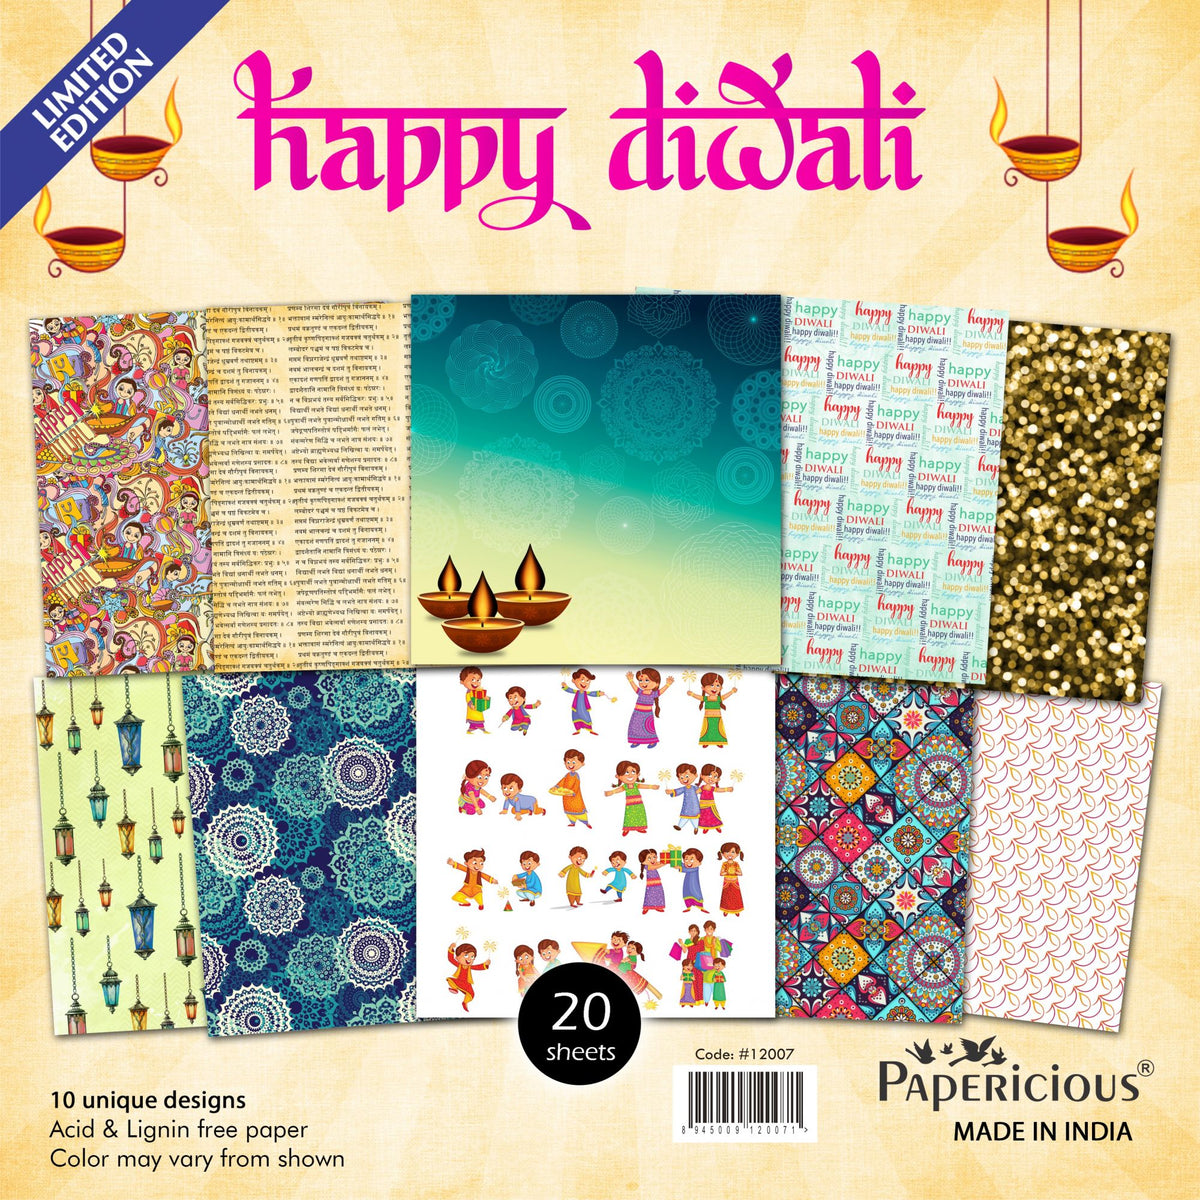 PAPERICIOUS - Happy Diwali -  Designer Pattern Printed Scrapbook Papers 12x12 inch  / 20 sheets